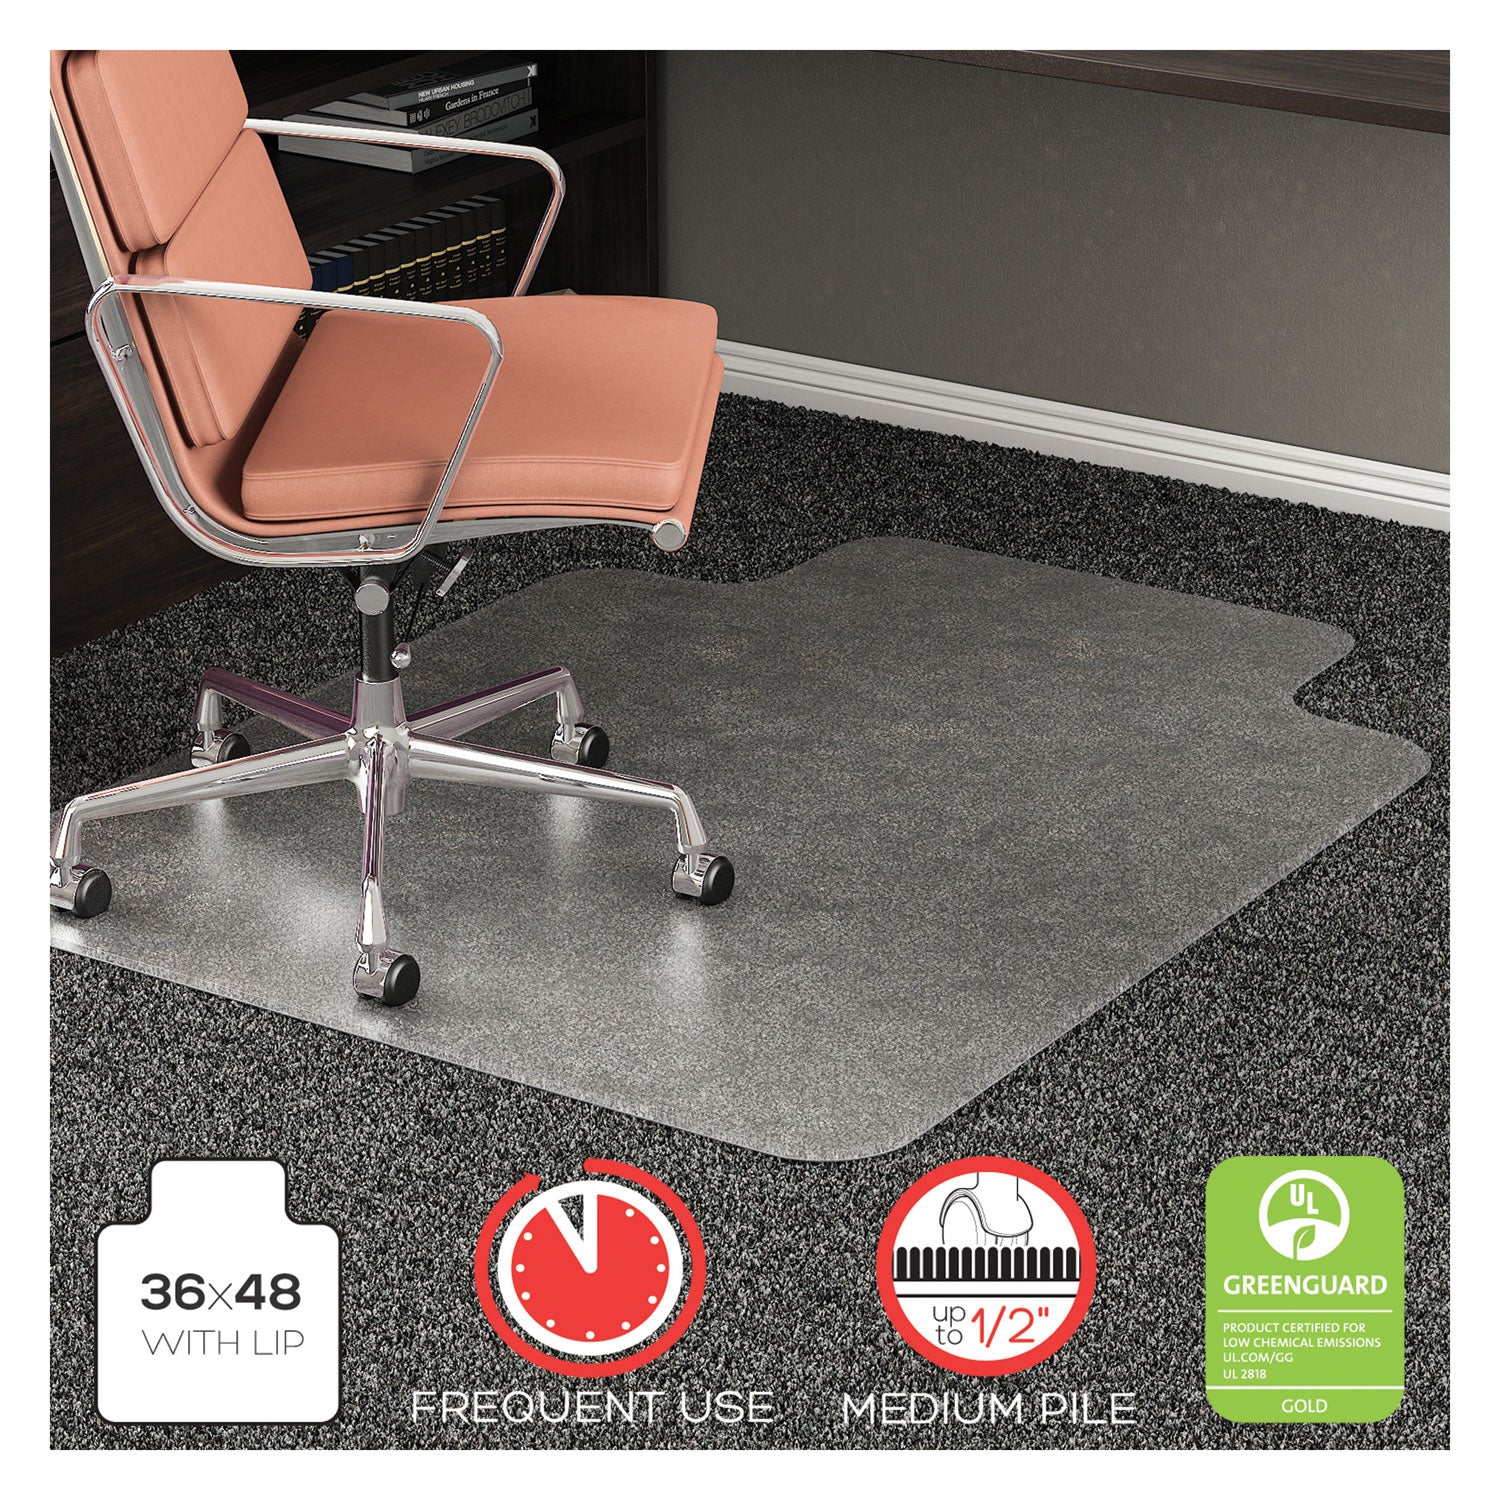 RollaMat Frequent Use Chair Mat, Med Pile Carpet, Flat, 36 x 48, Lipped, Clear - 